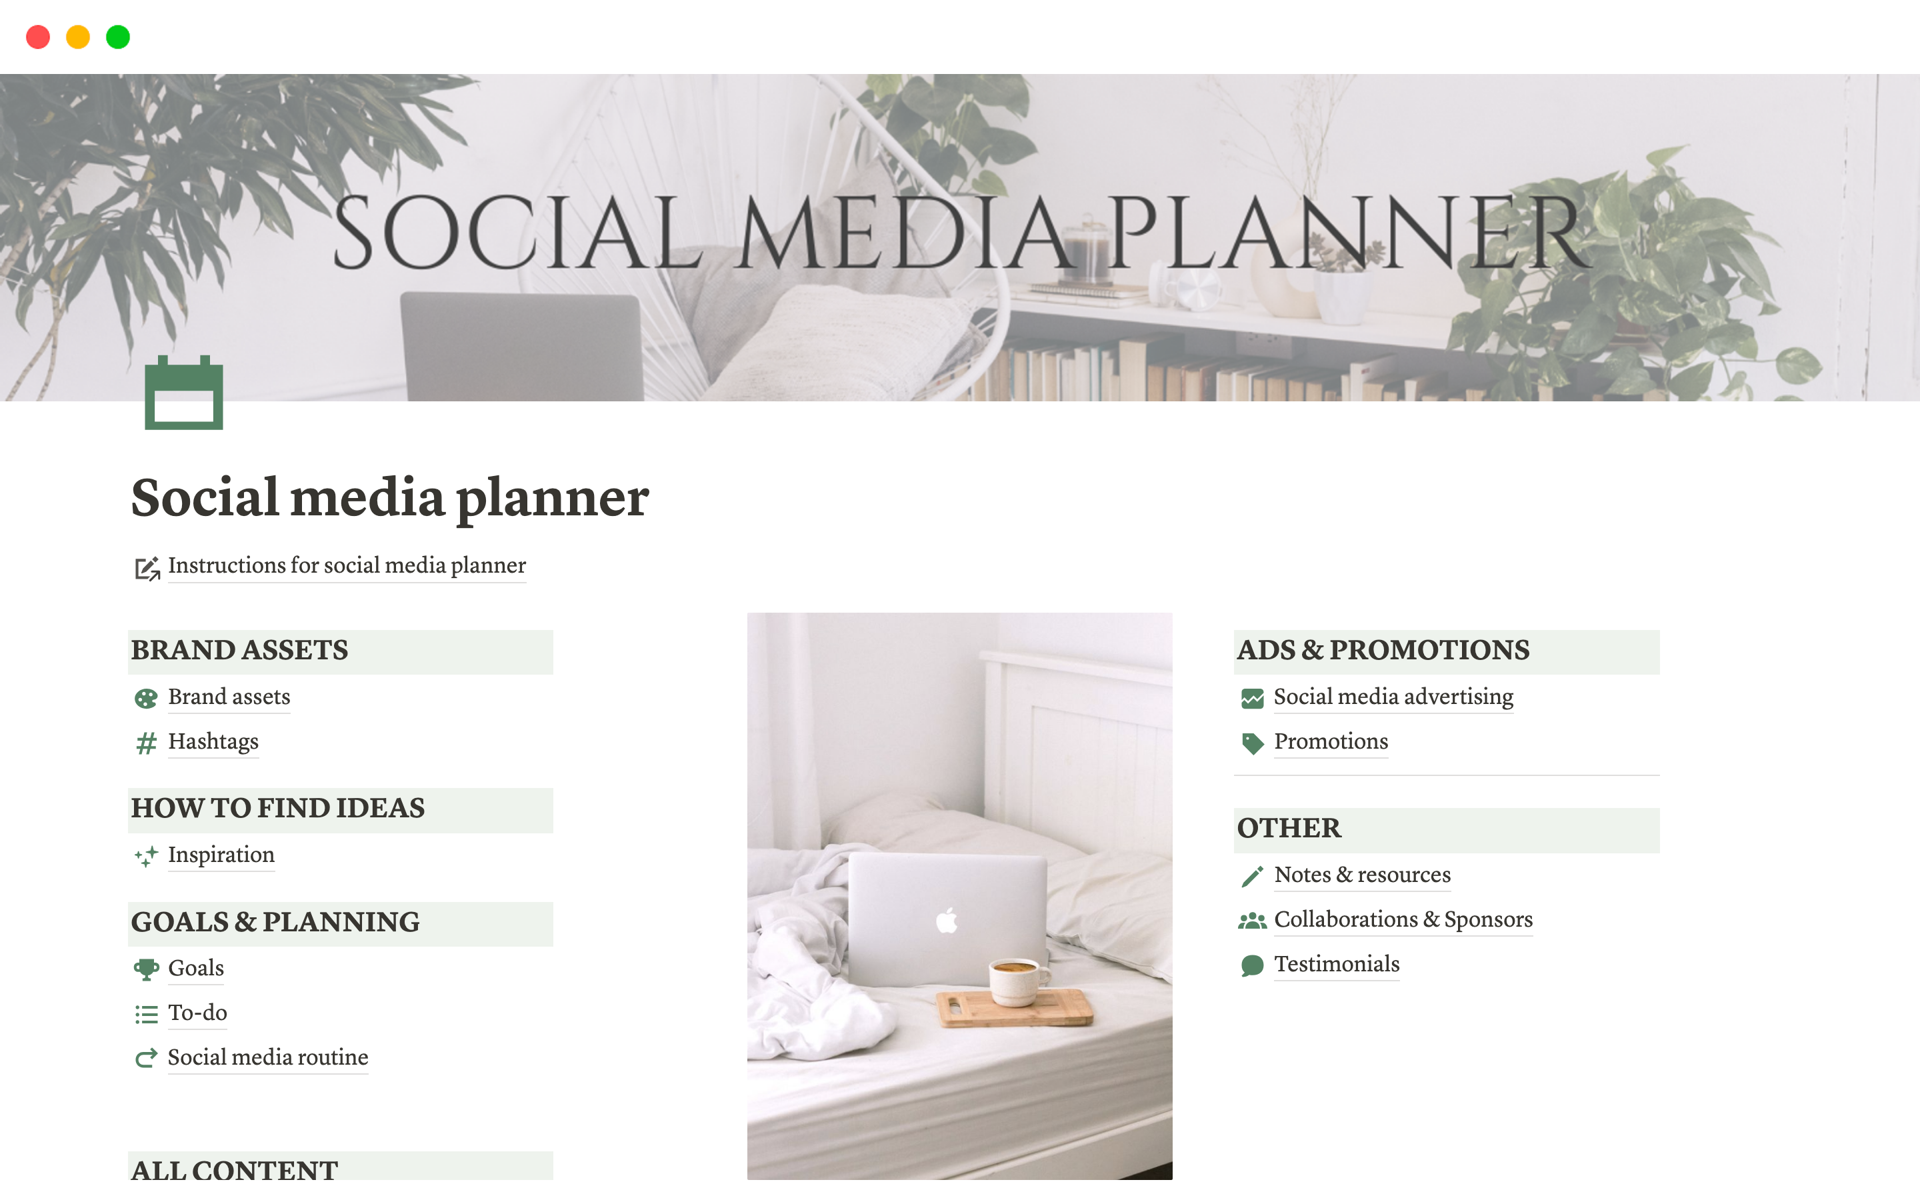 This all-in-one social media planner will help you create your content calendar easily for all platforms, like Instagram, Facebook, YouTube, TikTok, Podcast, Newsletter and more! 